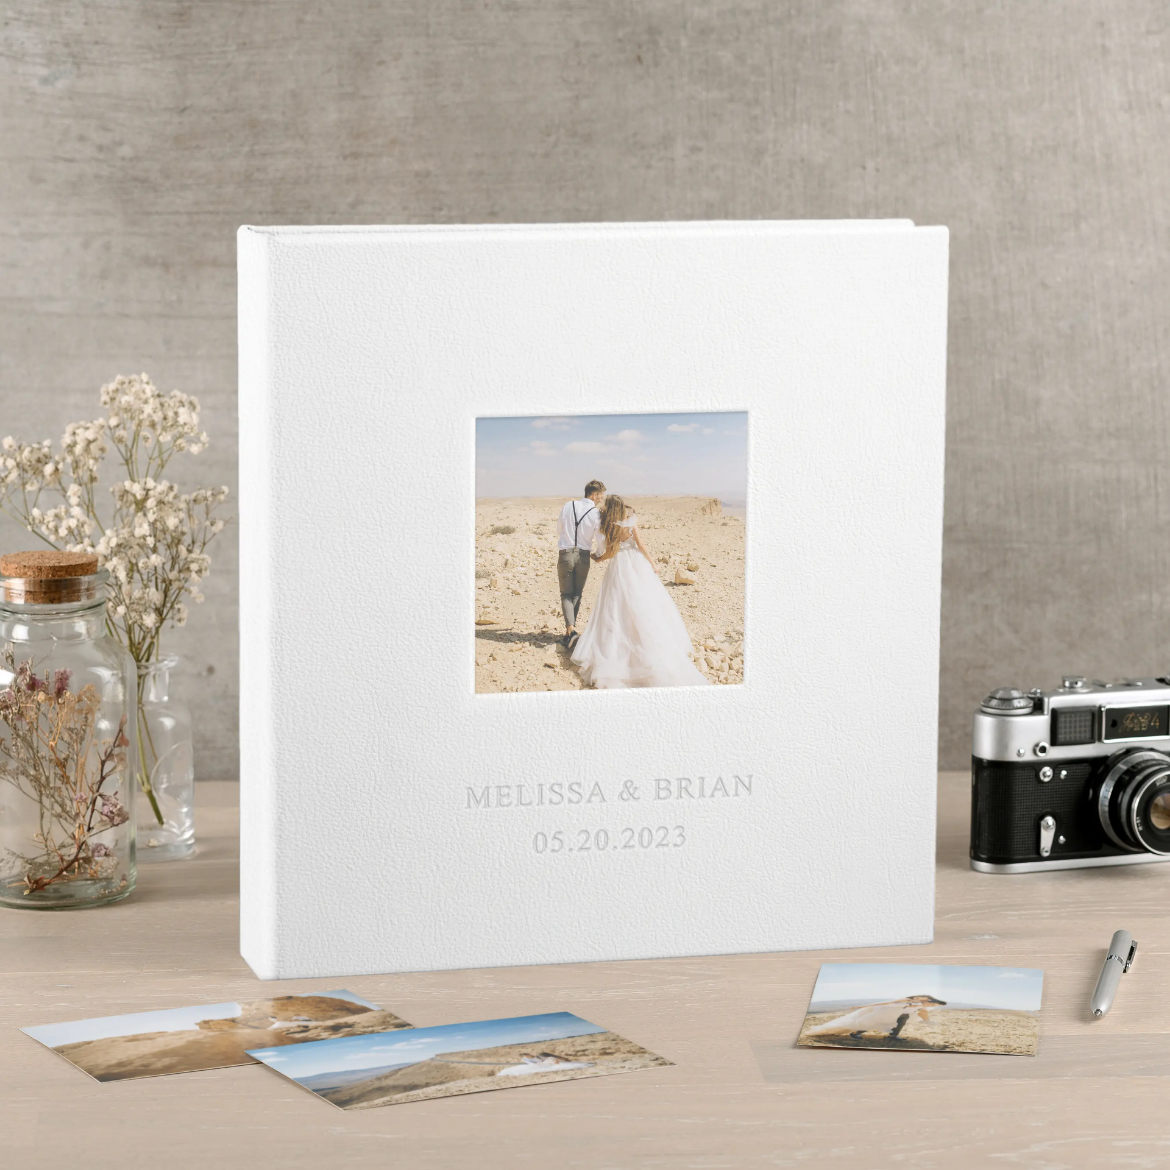 Picture of Eco Leather Lay Flat Photo Book, Photo Window, Size M (8x10", 8x12", 10x8", 12x8", 10x10", 12x12")